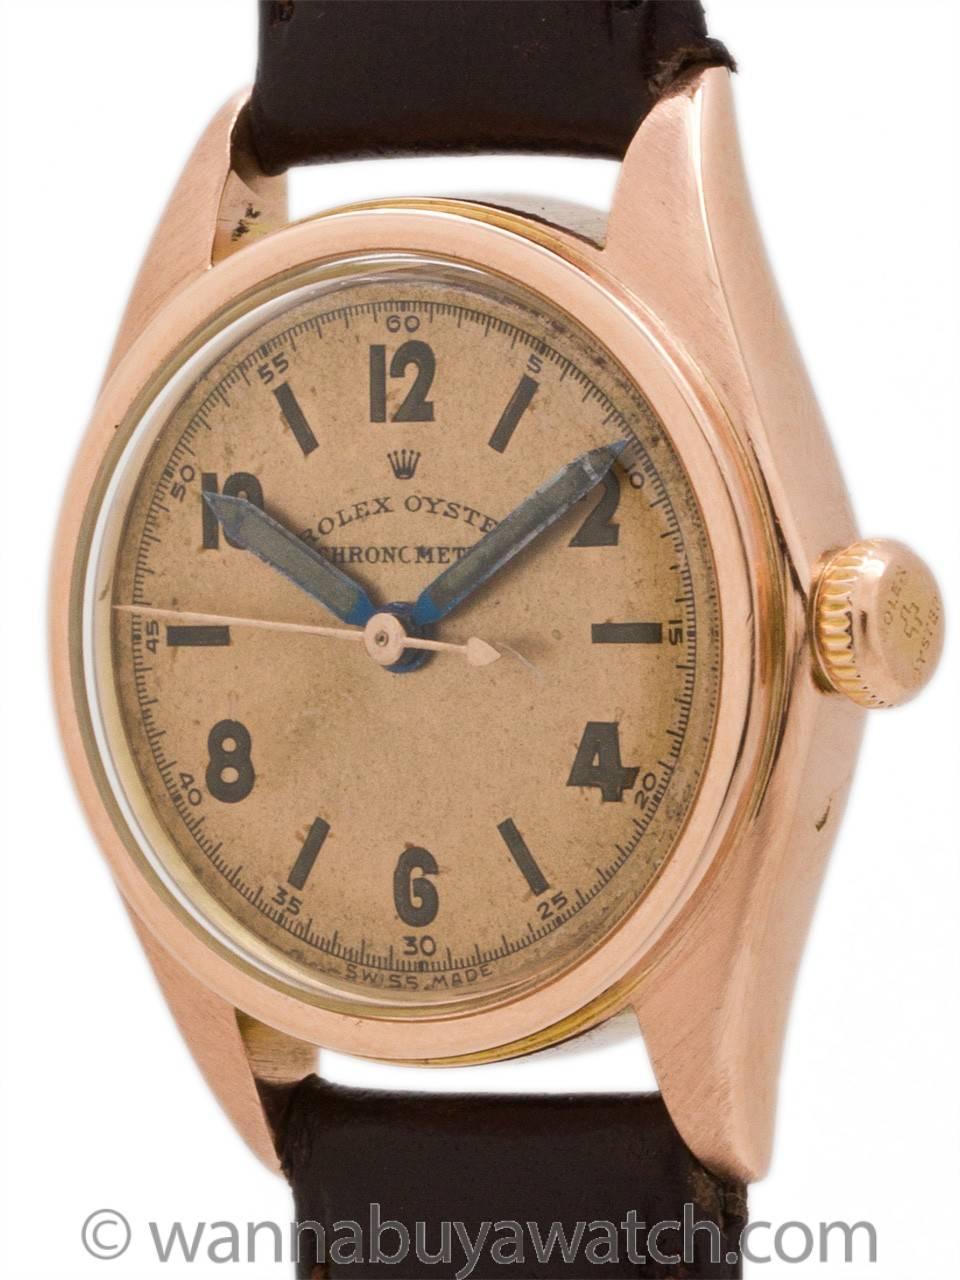 Vintage Rolex 14K Rose Gold manual wind boy’s size (31mm) Oyster case with screw down case back and rose gold screw down bubble back era crown circa 1940’s. With very pleasing original patina dial with original radium luminous figures and original